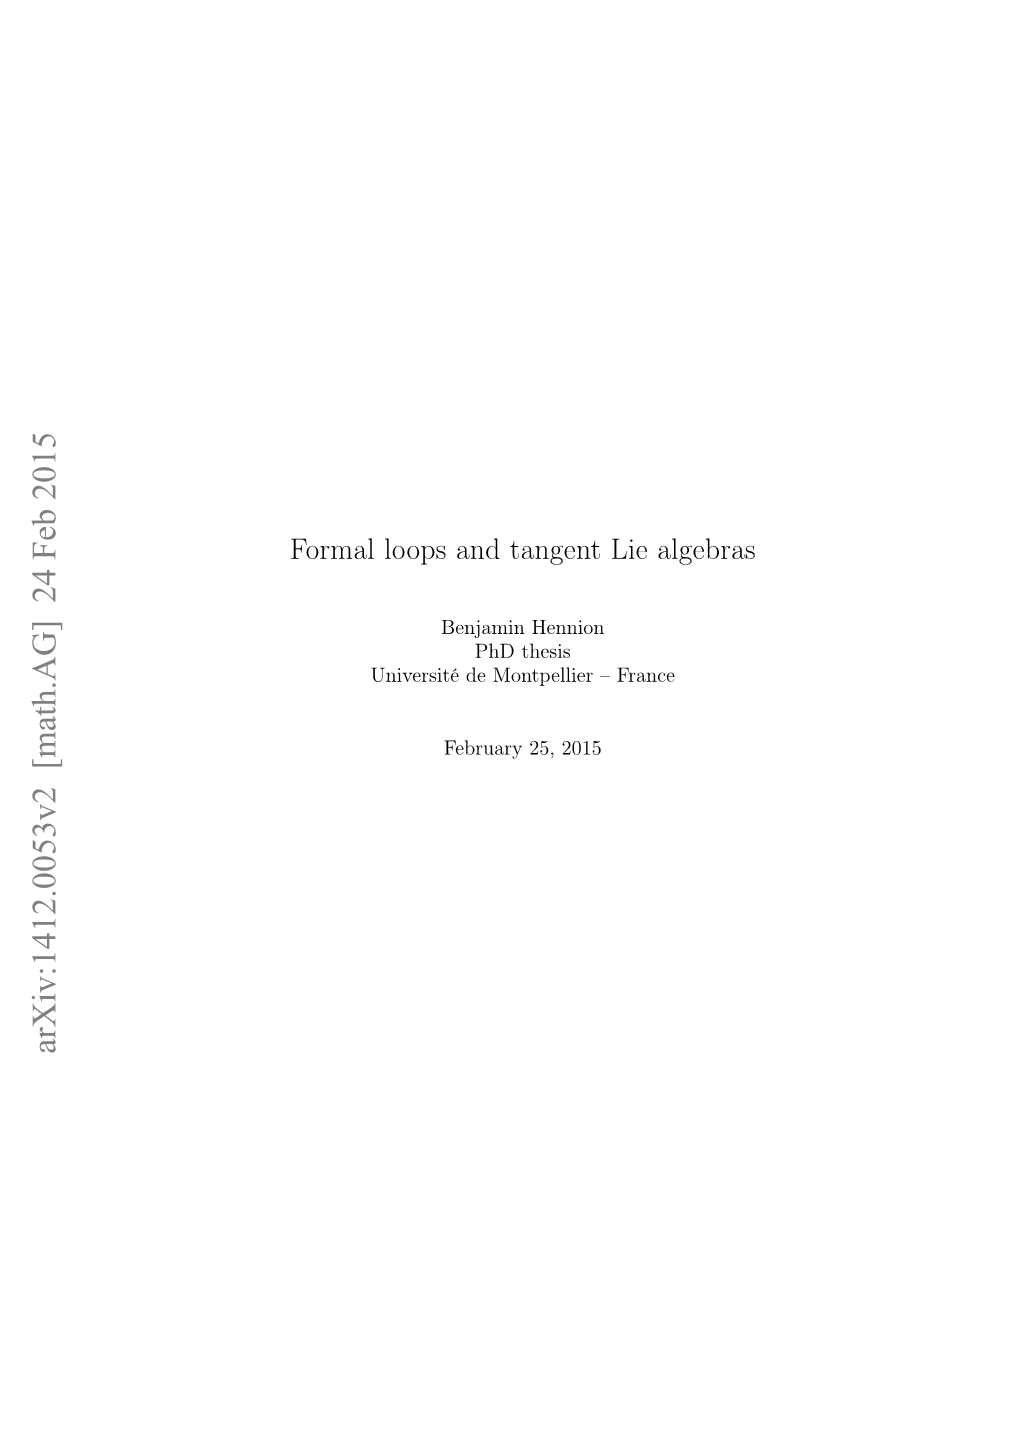 Formal Loops, Tate Objects and Tangent Lie Algebras